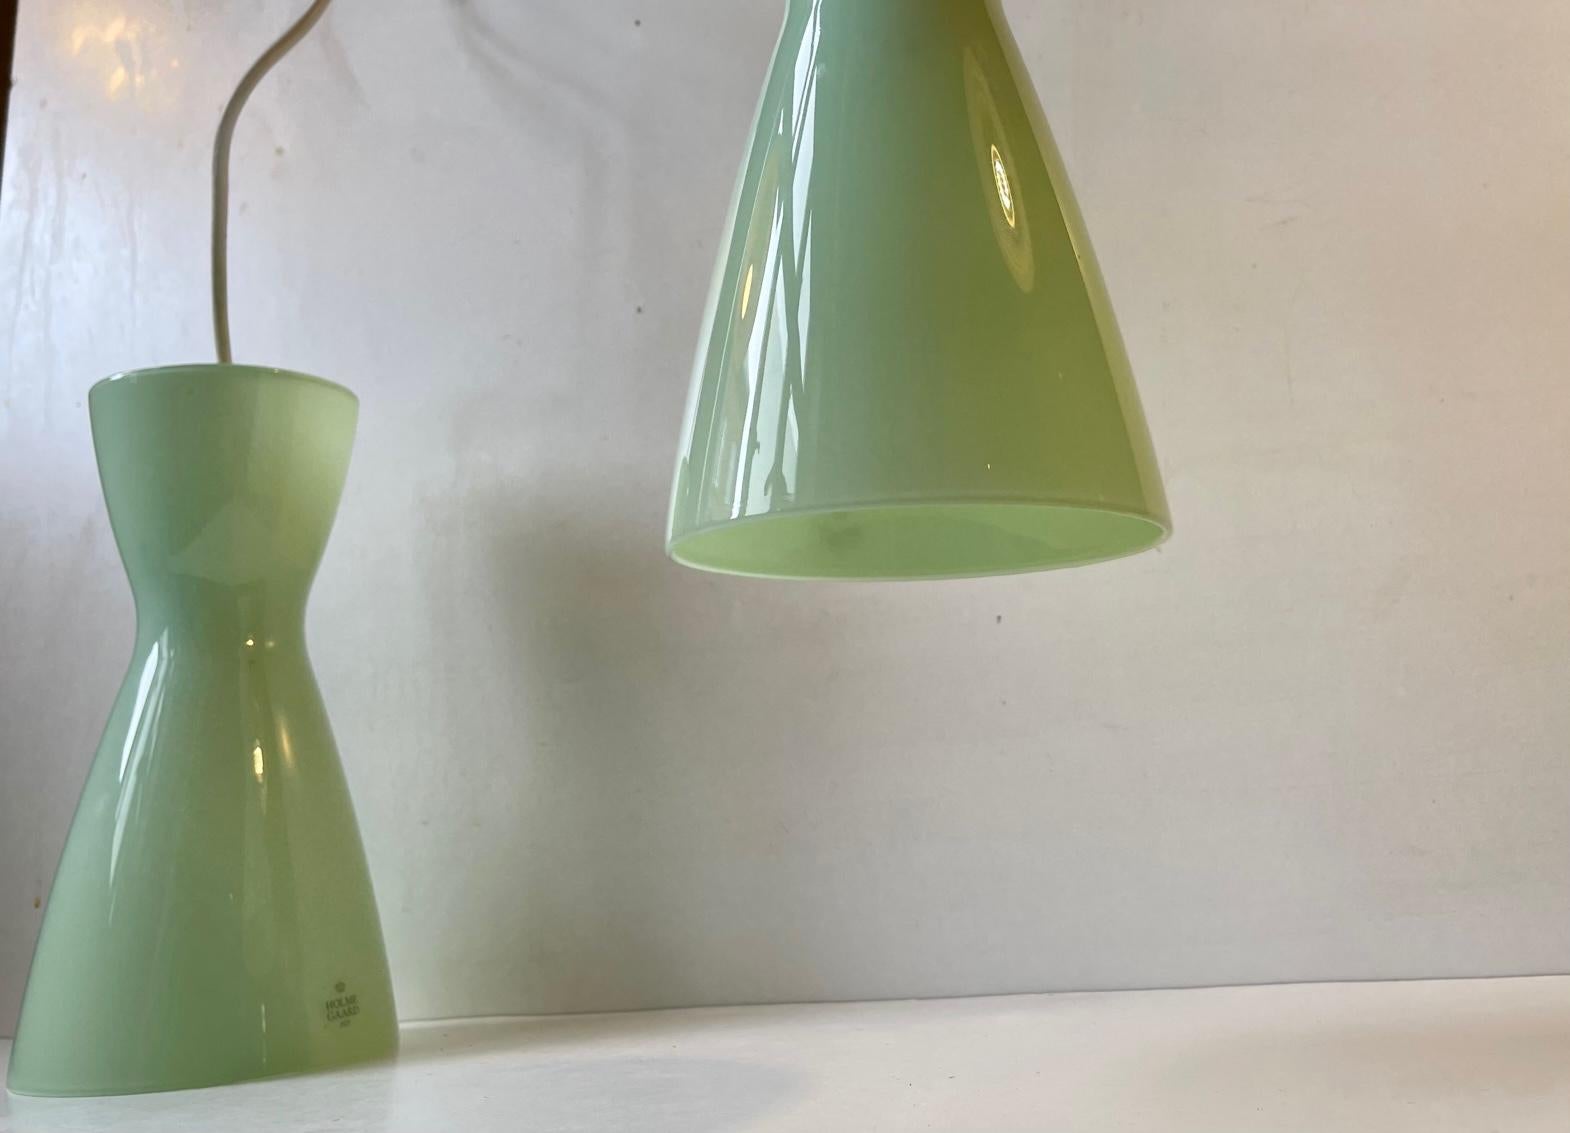 Late 20th Century Jade Green Holmegaard Glass Pendant Lamps by Peter Svarrer